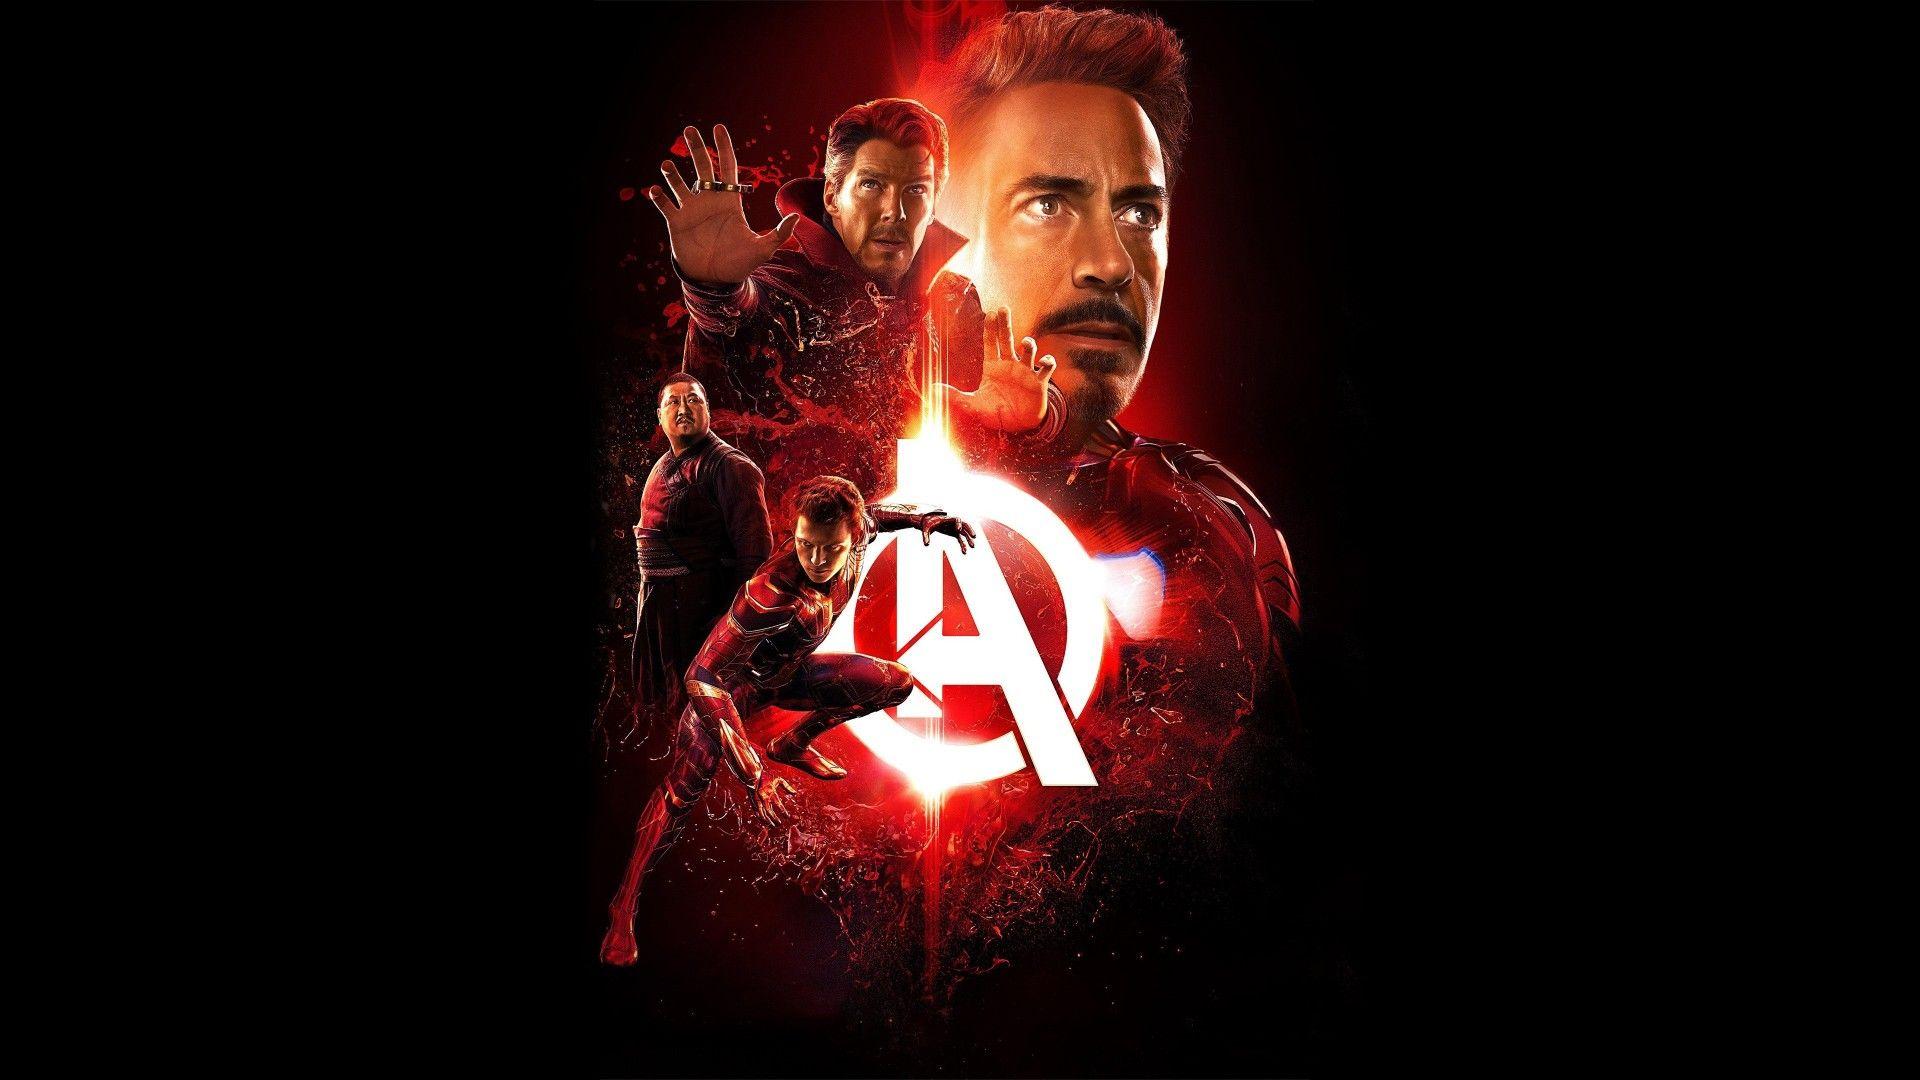 Avengers Endgame HD Wallpapers for Smartphones, Laptops and PC's